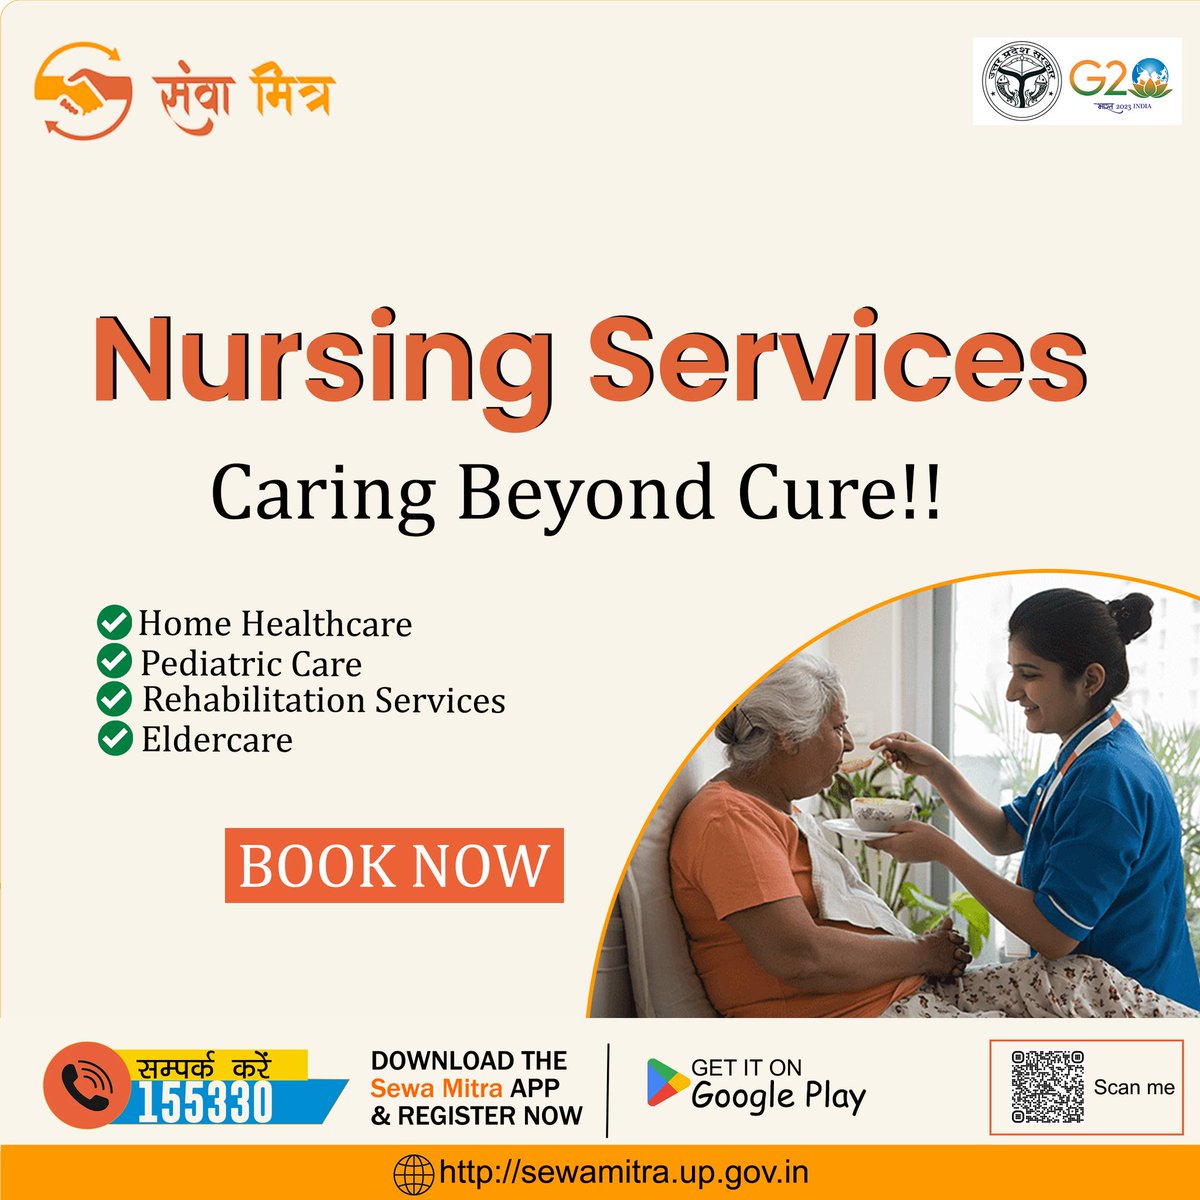 Our Caregiving Team Knows How to Make Even the Toughest Days a Little Brighter – Turning Recovery into a Joy Ride. 😎💊💉

@dmazamgarh @DMMau1 @dmhamirpurup
#nursingservices #nurses #elderlycare #patientcare #HomeCare #sewamitra #sewamitraservices